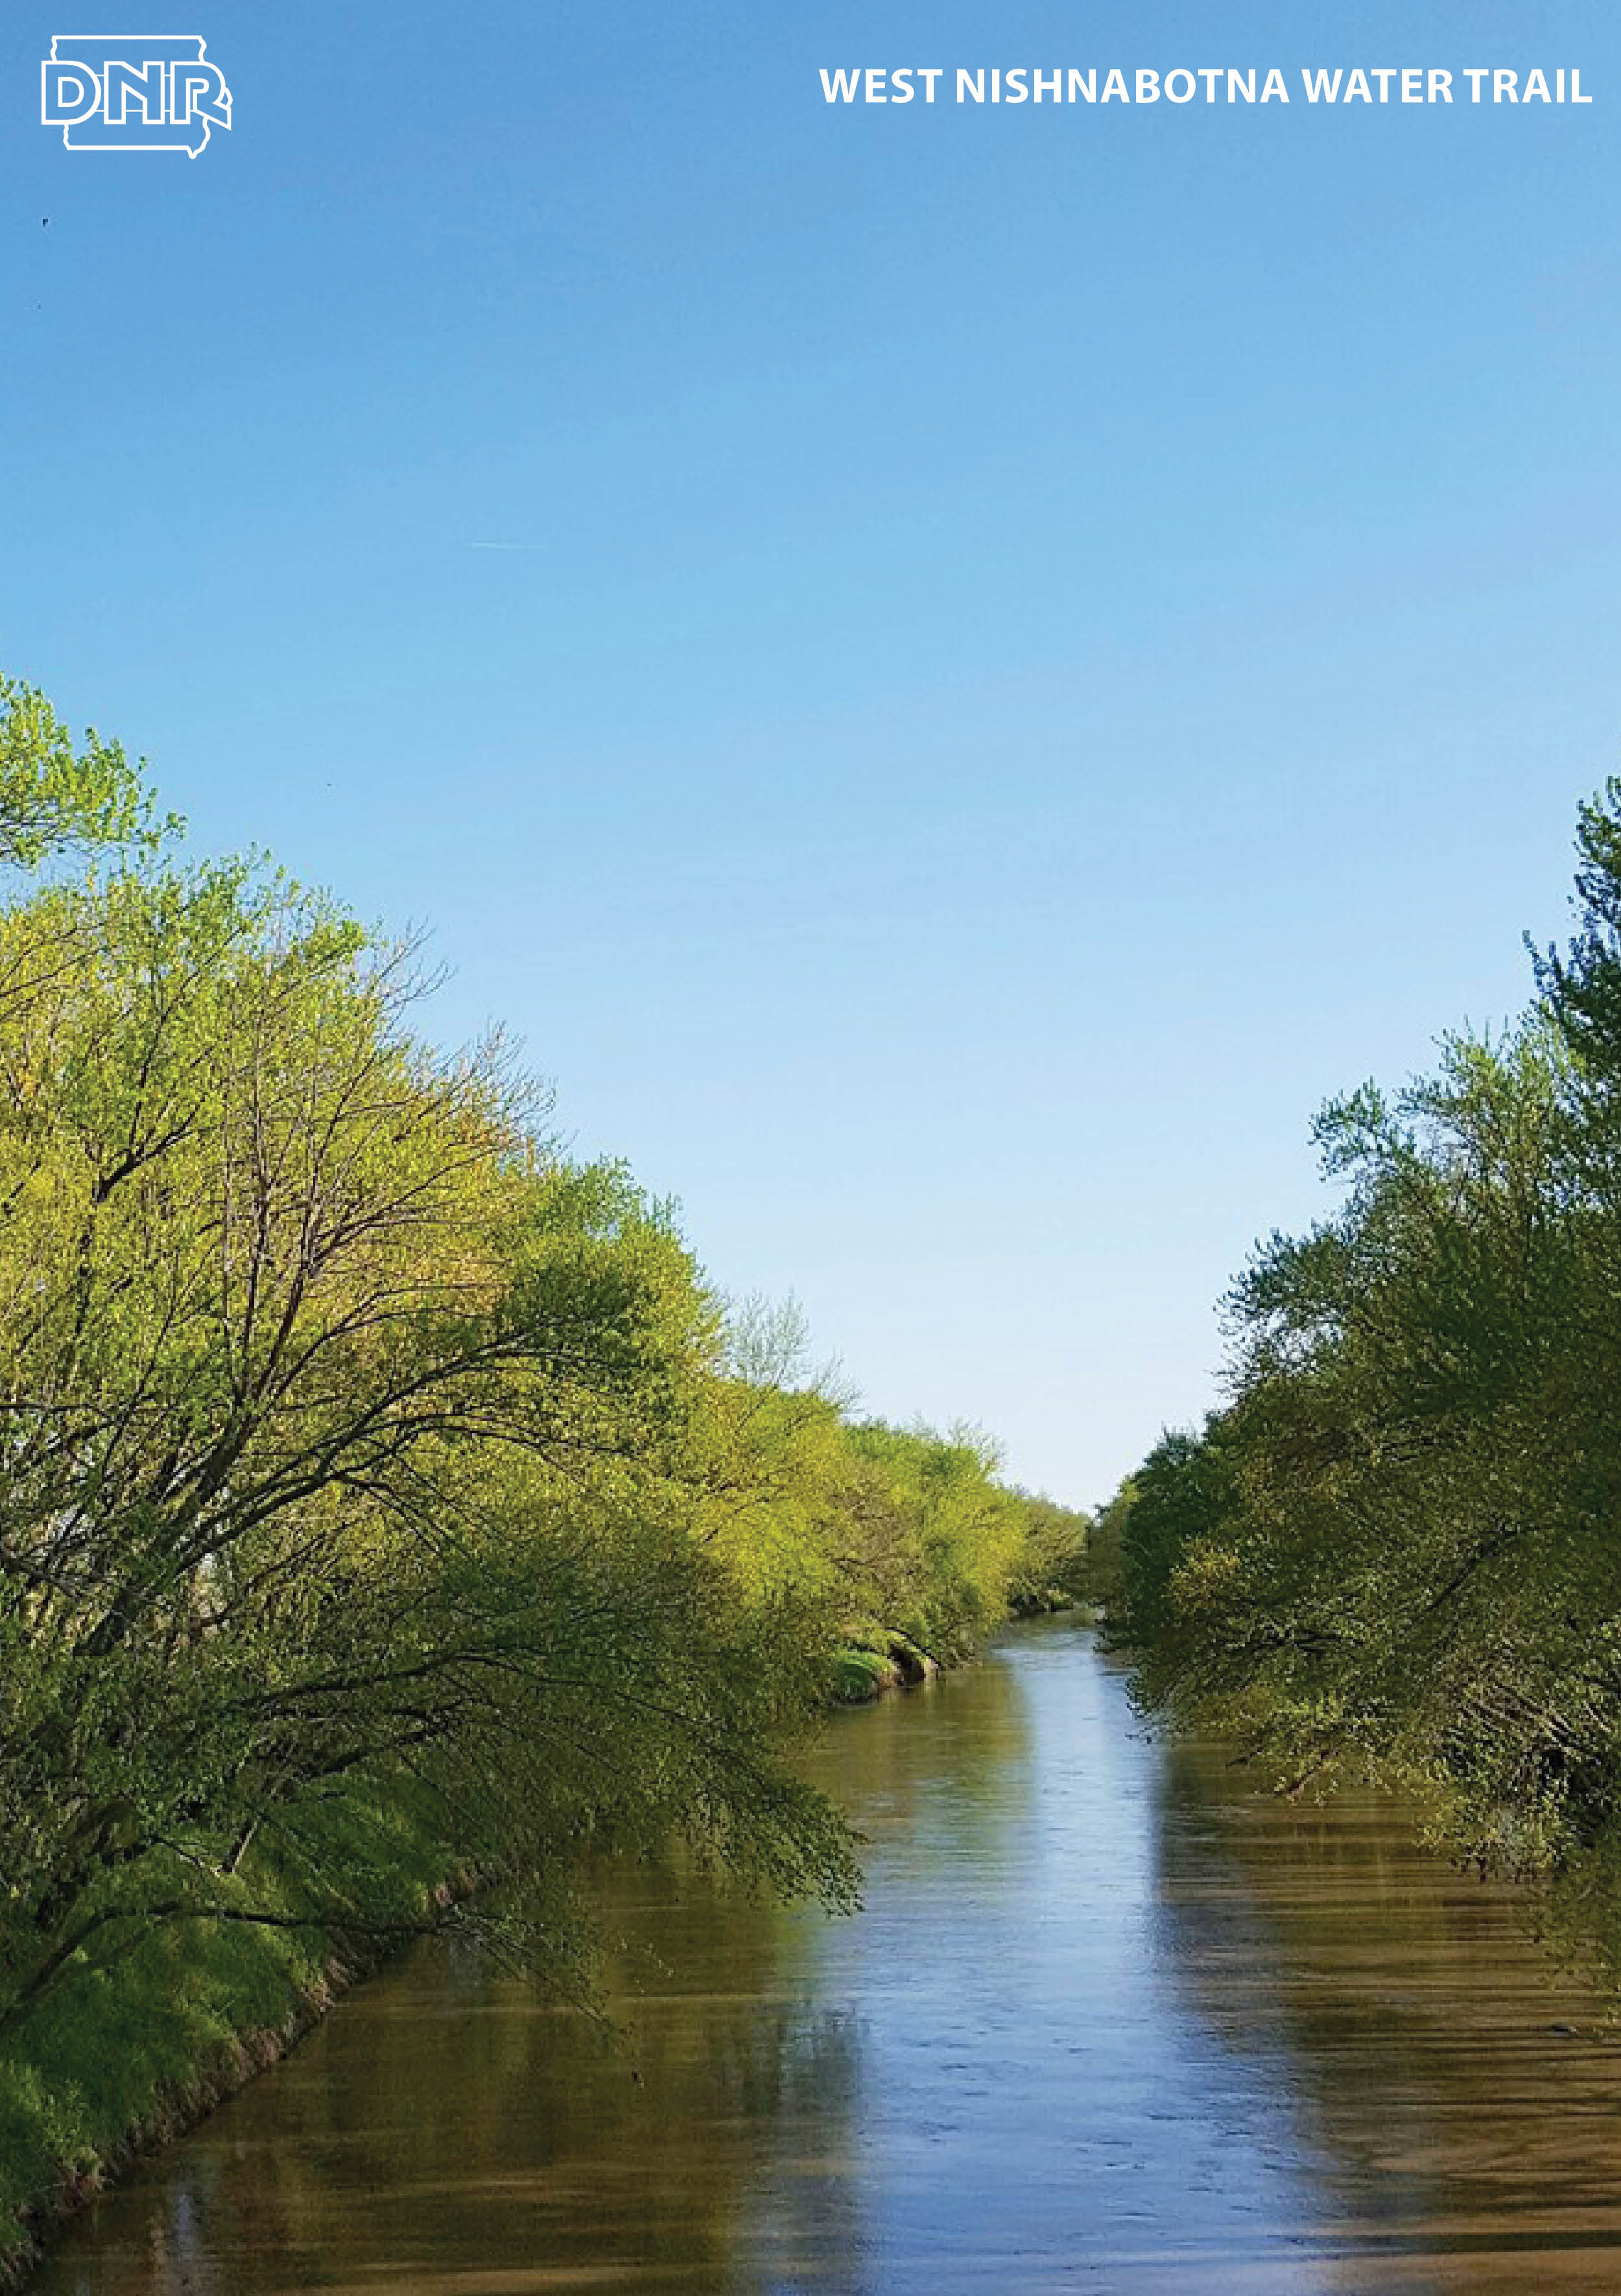 The West Nishnabotna River is one of our 6 Water Trails to try this spring | Iowa DNR